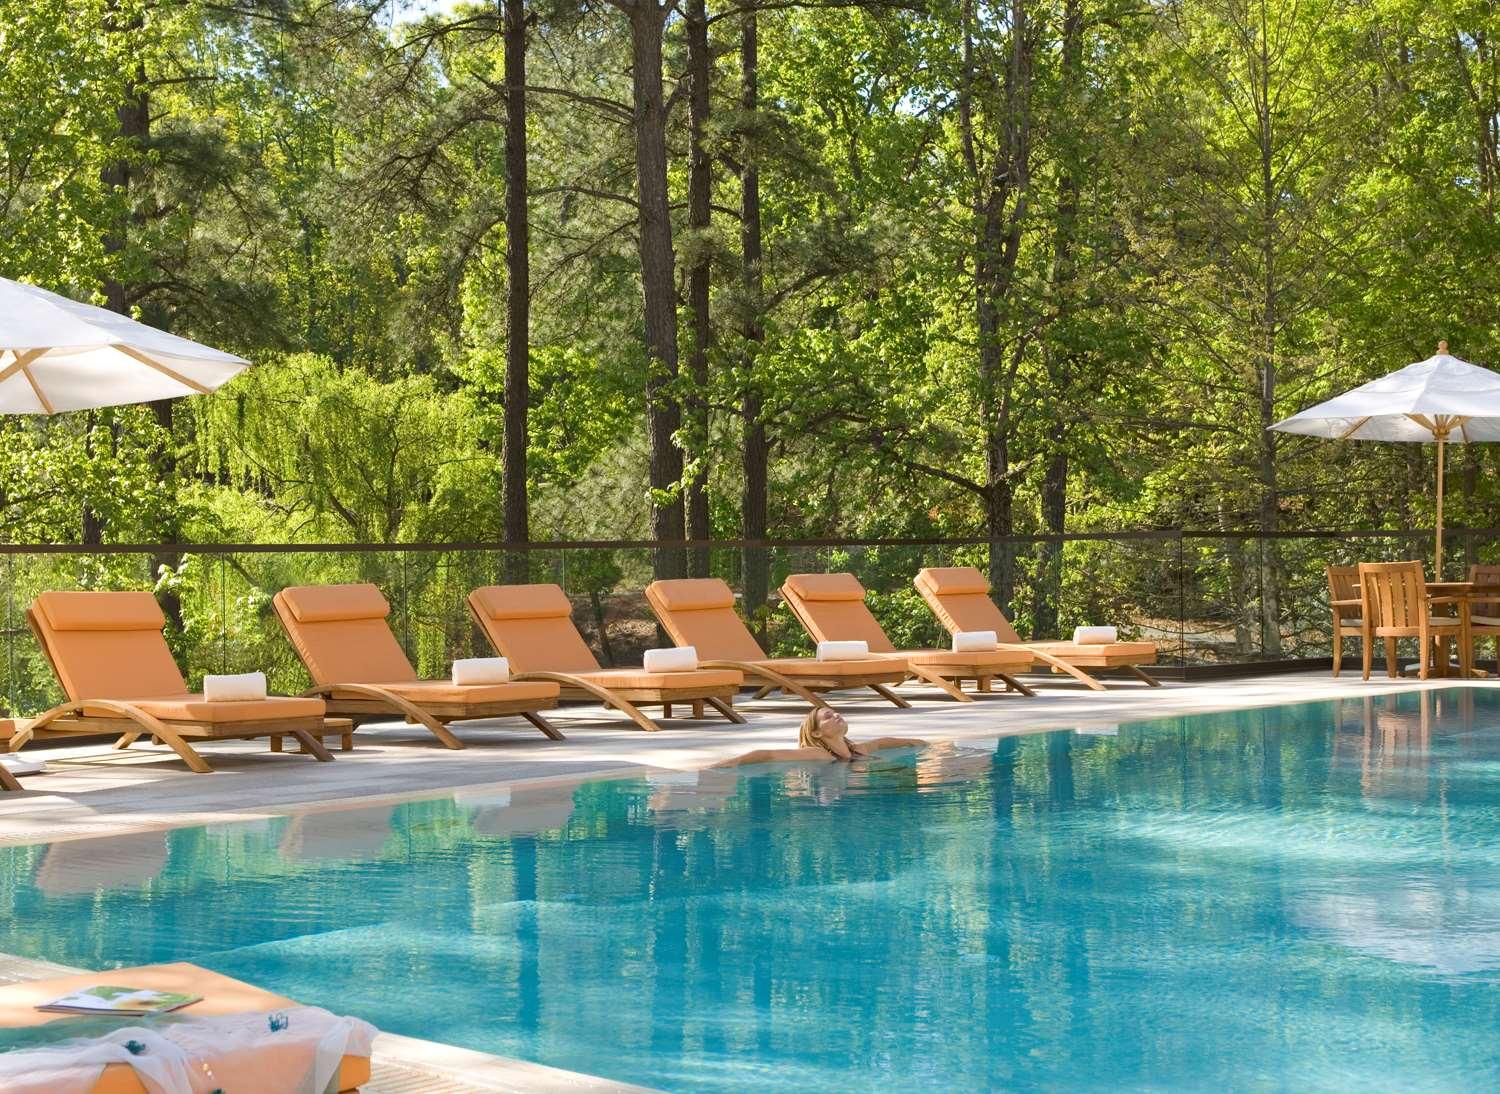 The Umstead Hotel and Spa